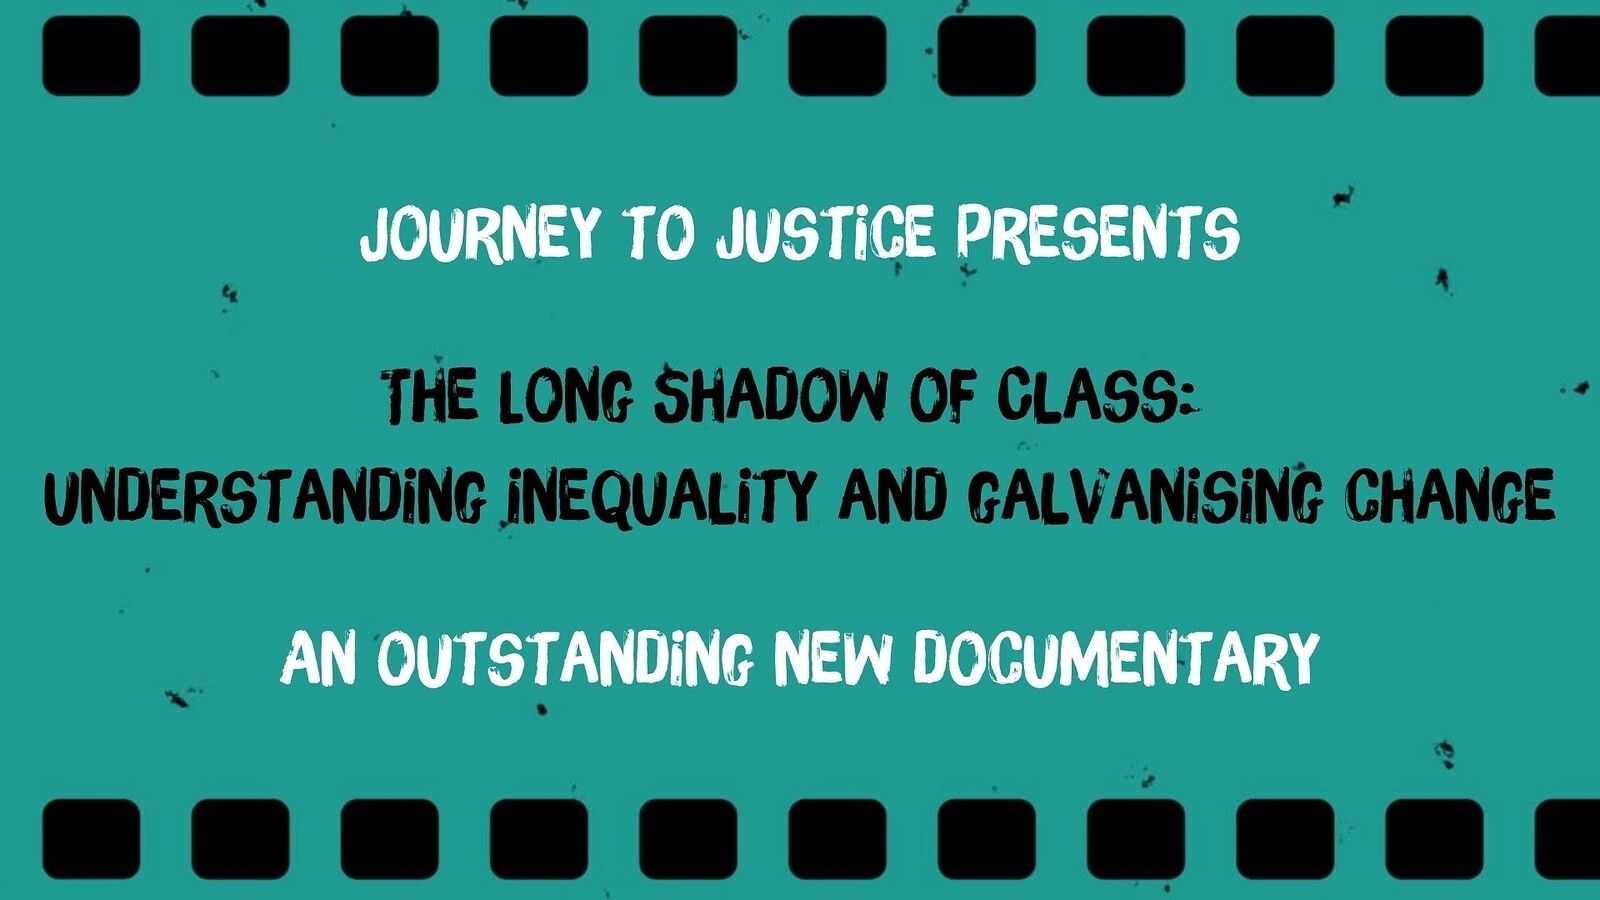 The Long Shadow of Class - documentary screening at PRSC